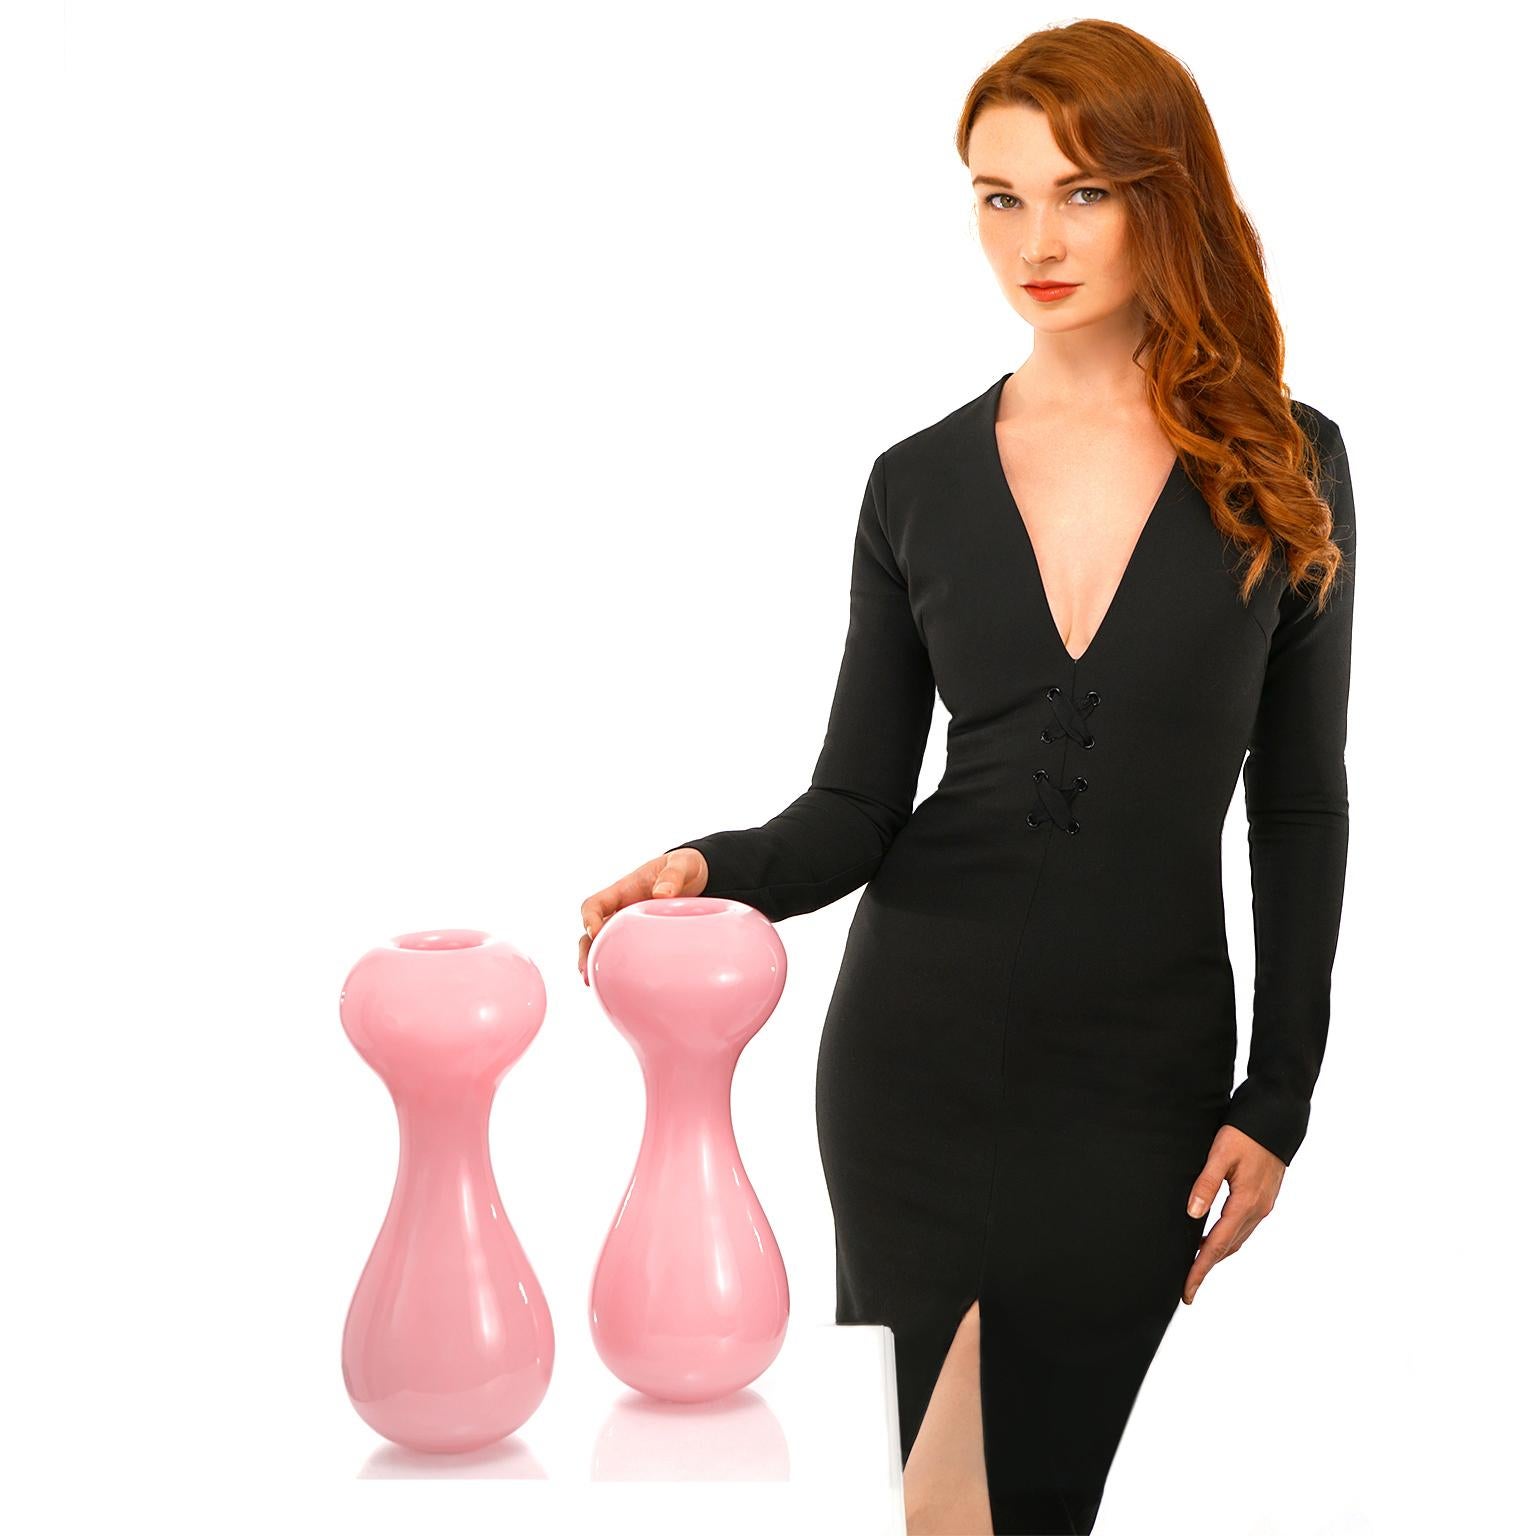 By Anne Nilsson for Kosta Boda, Sweden, circa early 2000s. This pair of brilliantly amorphous vases by the renowned Kosta Boda designer, Anne Nilsson, are redolent of 1950s modernist style. Fabulous in pink, it is a rare color and rarer still to